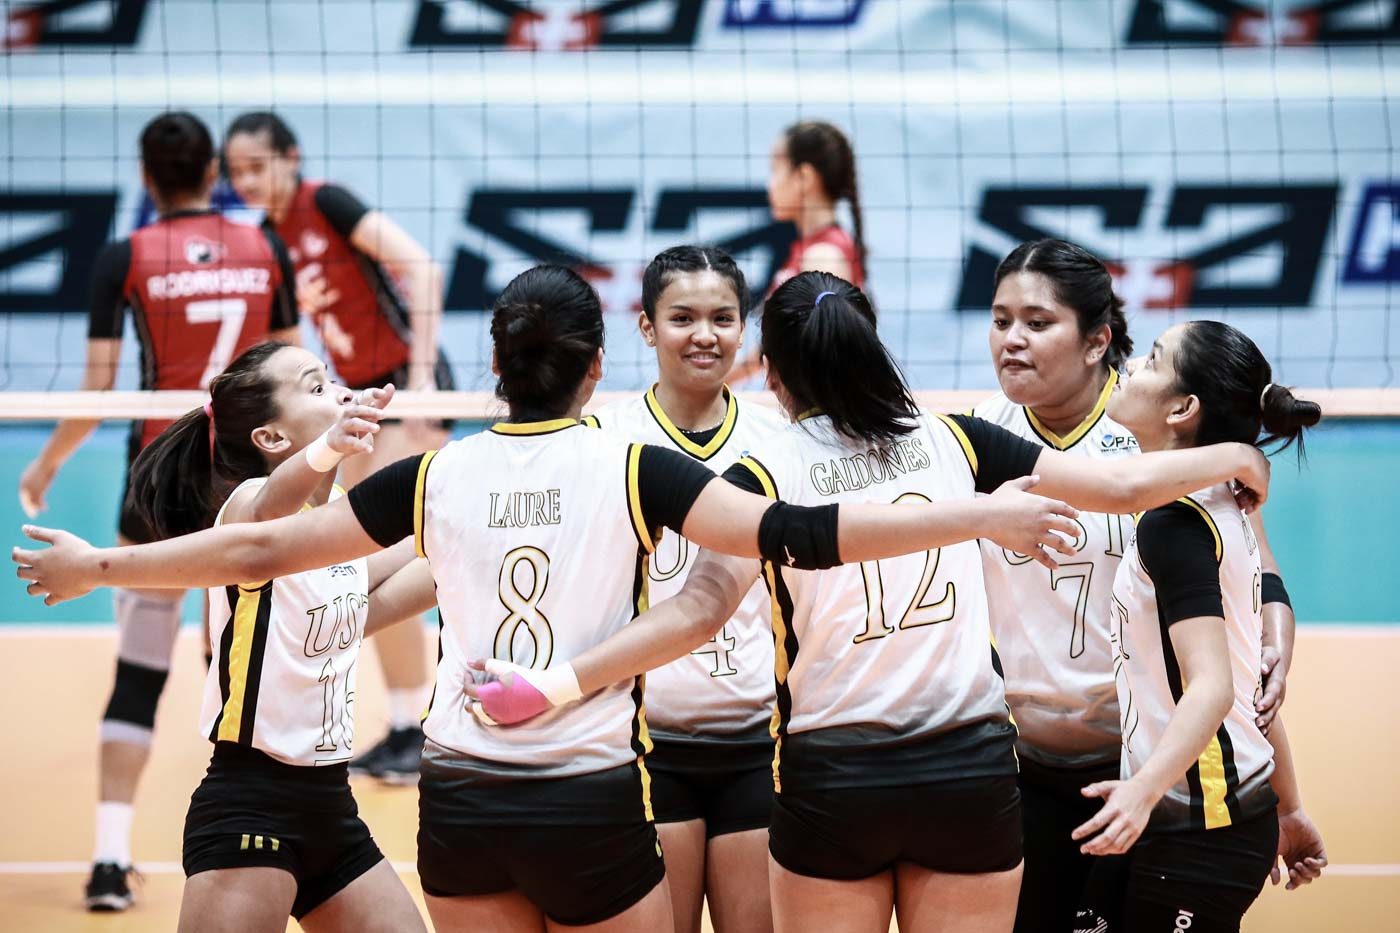 UST knocks out UE from playoff contention